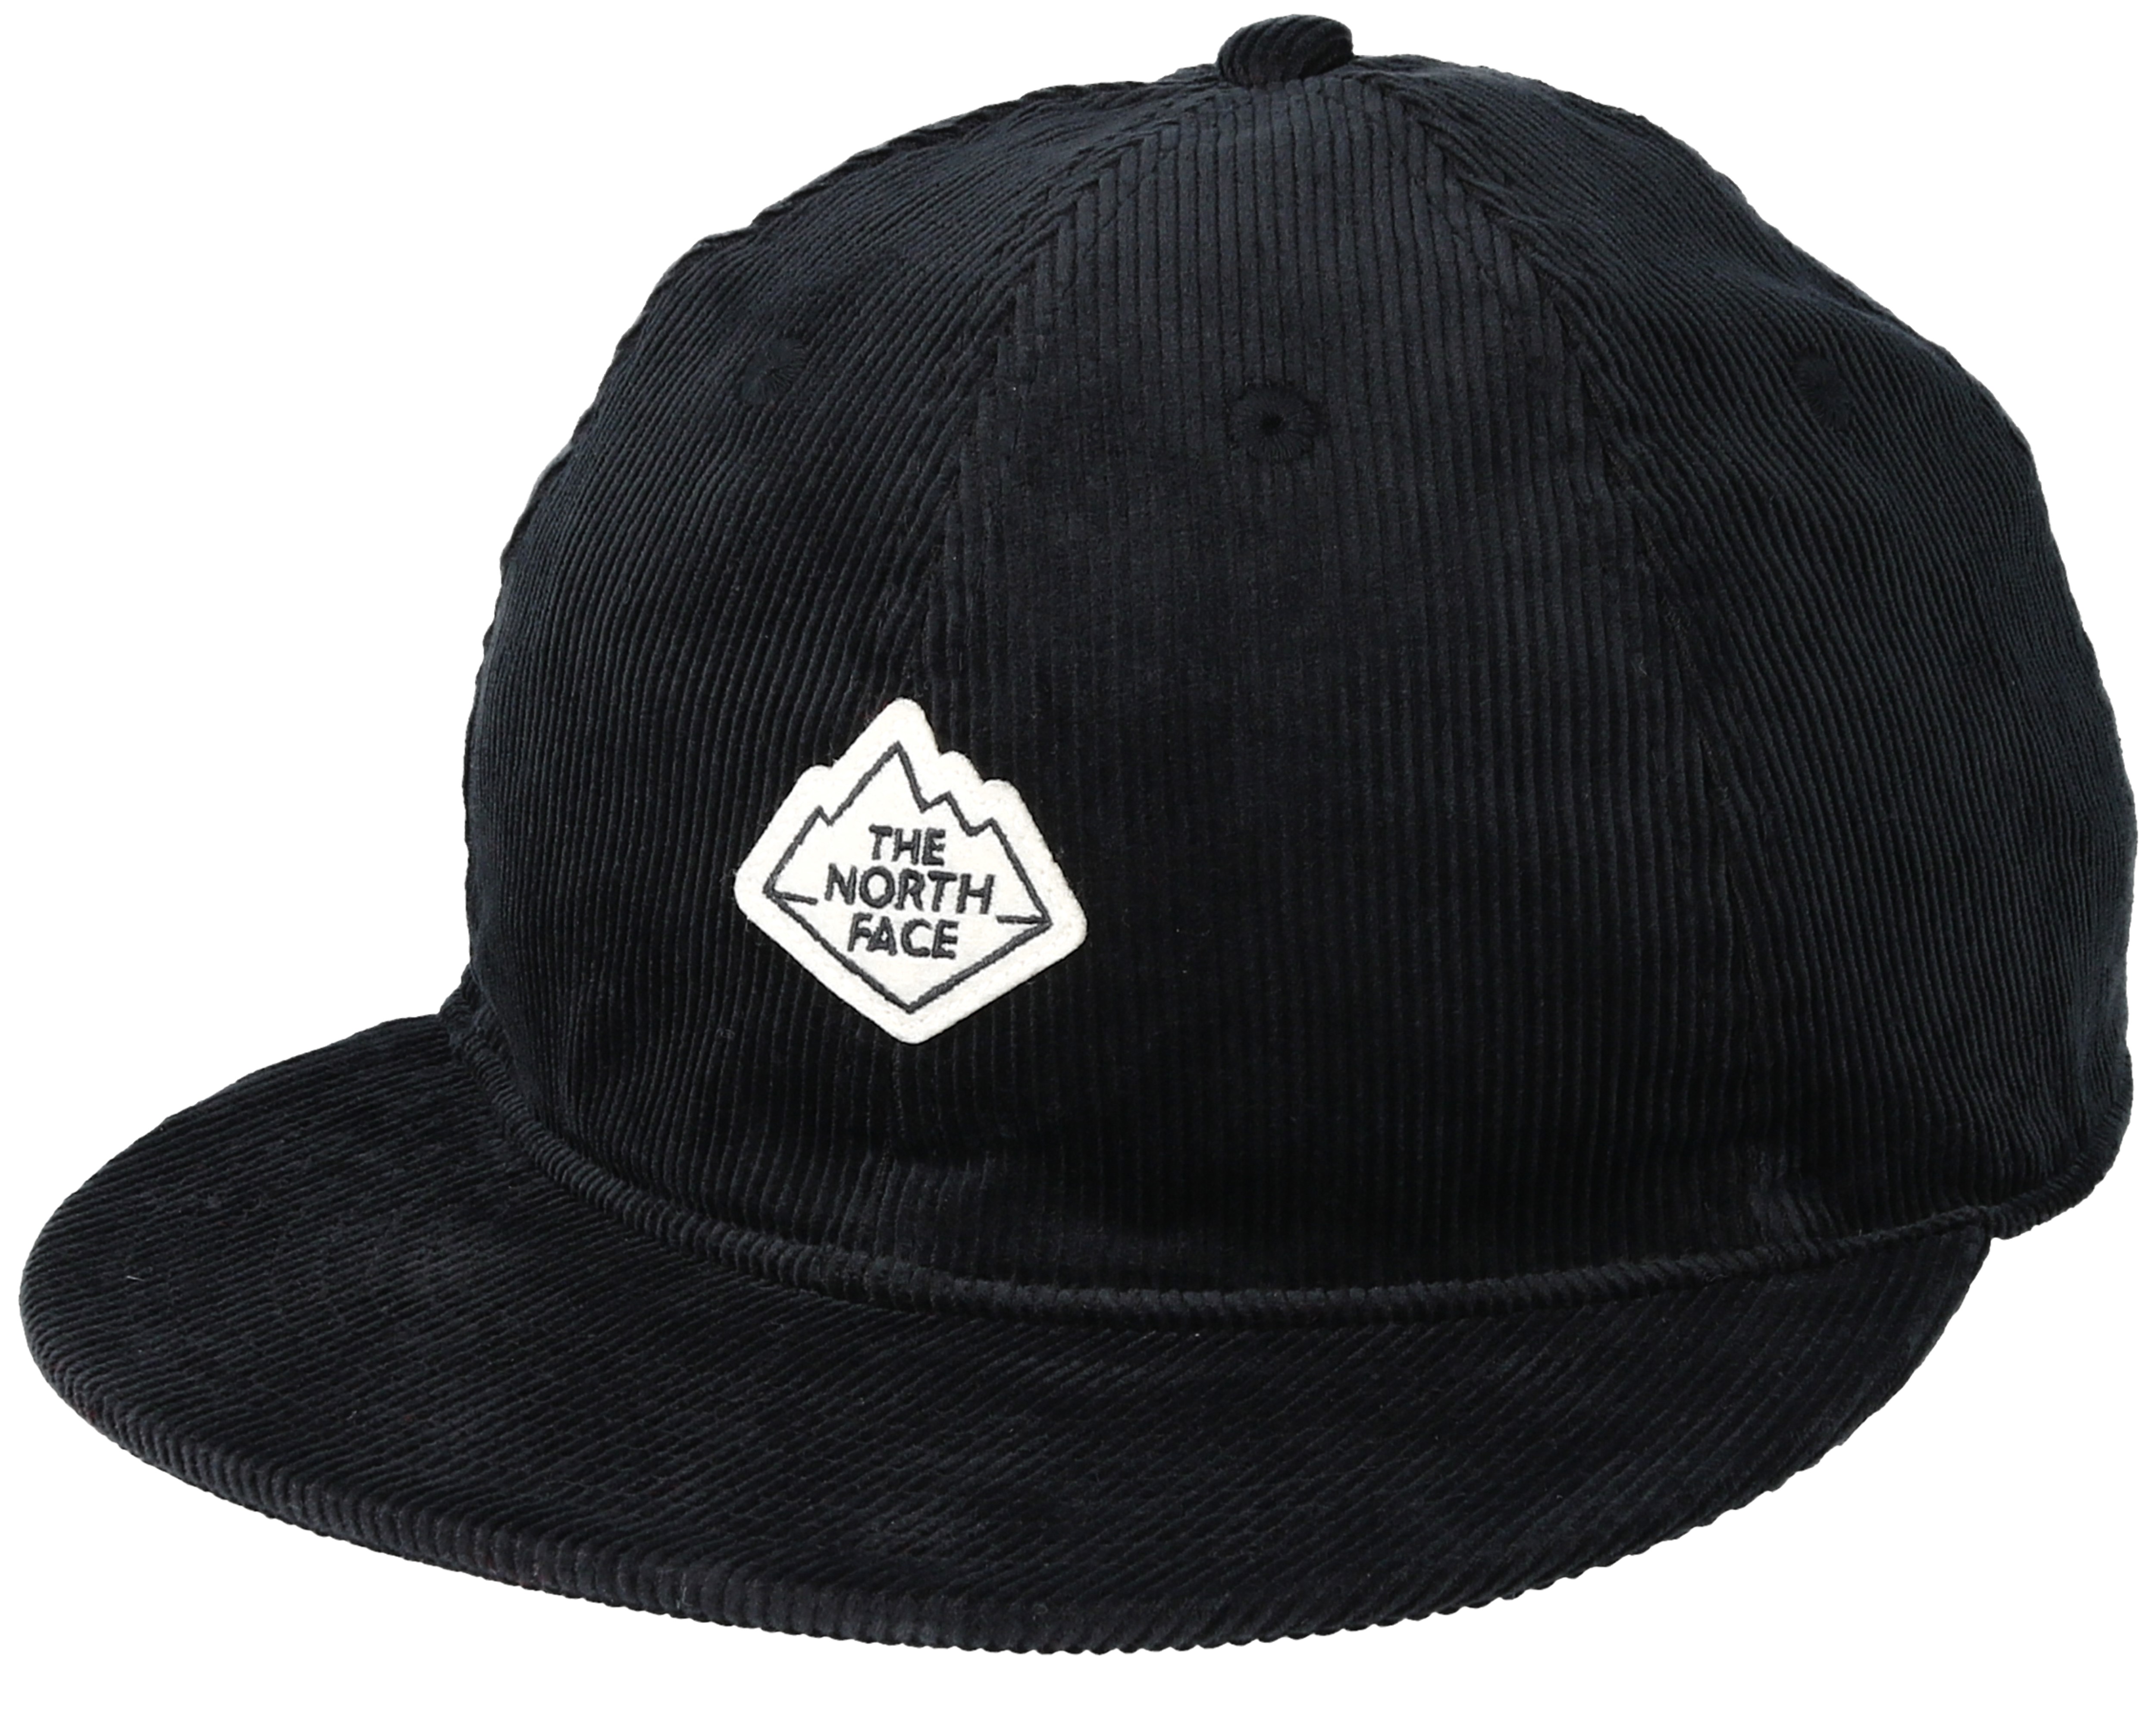 Strike A Cord Black Snapback - The North Face caps | Hatstore.co.uk